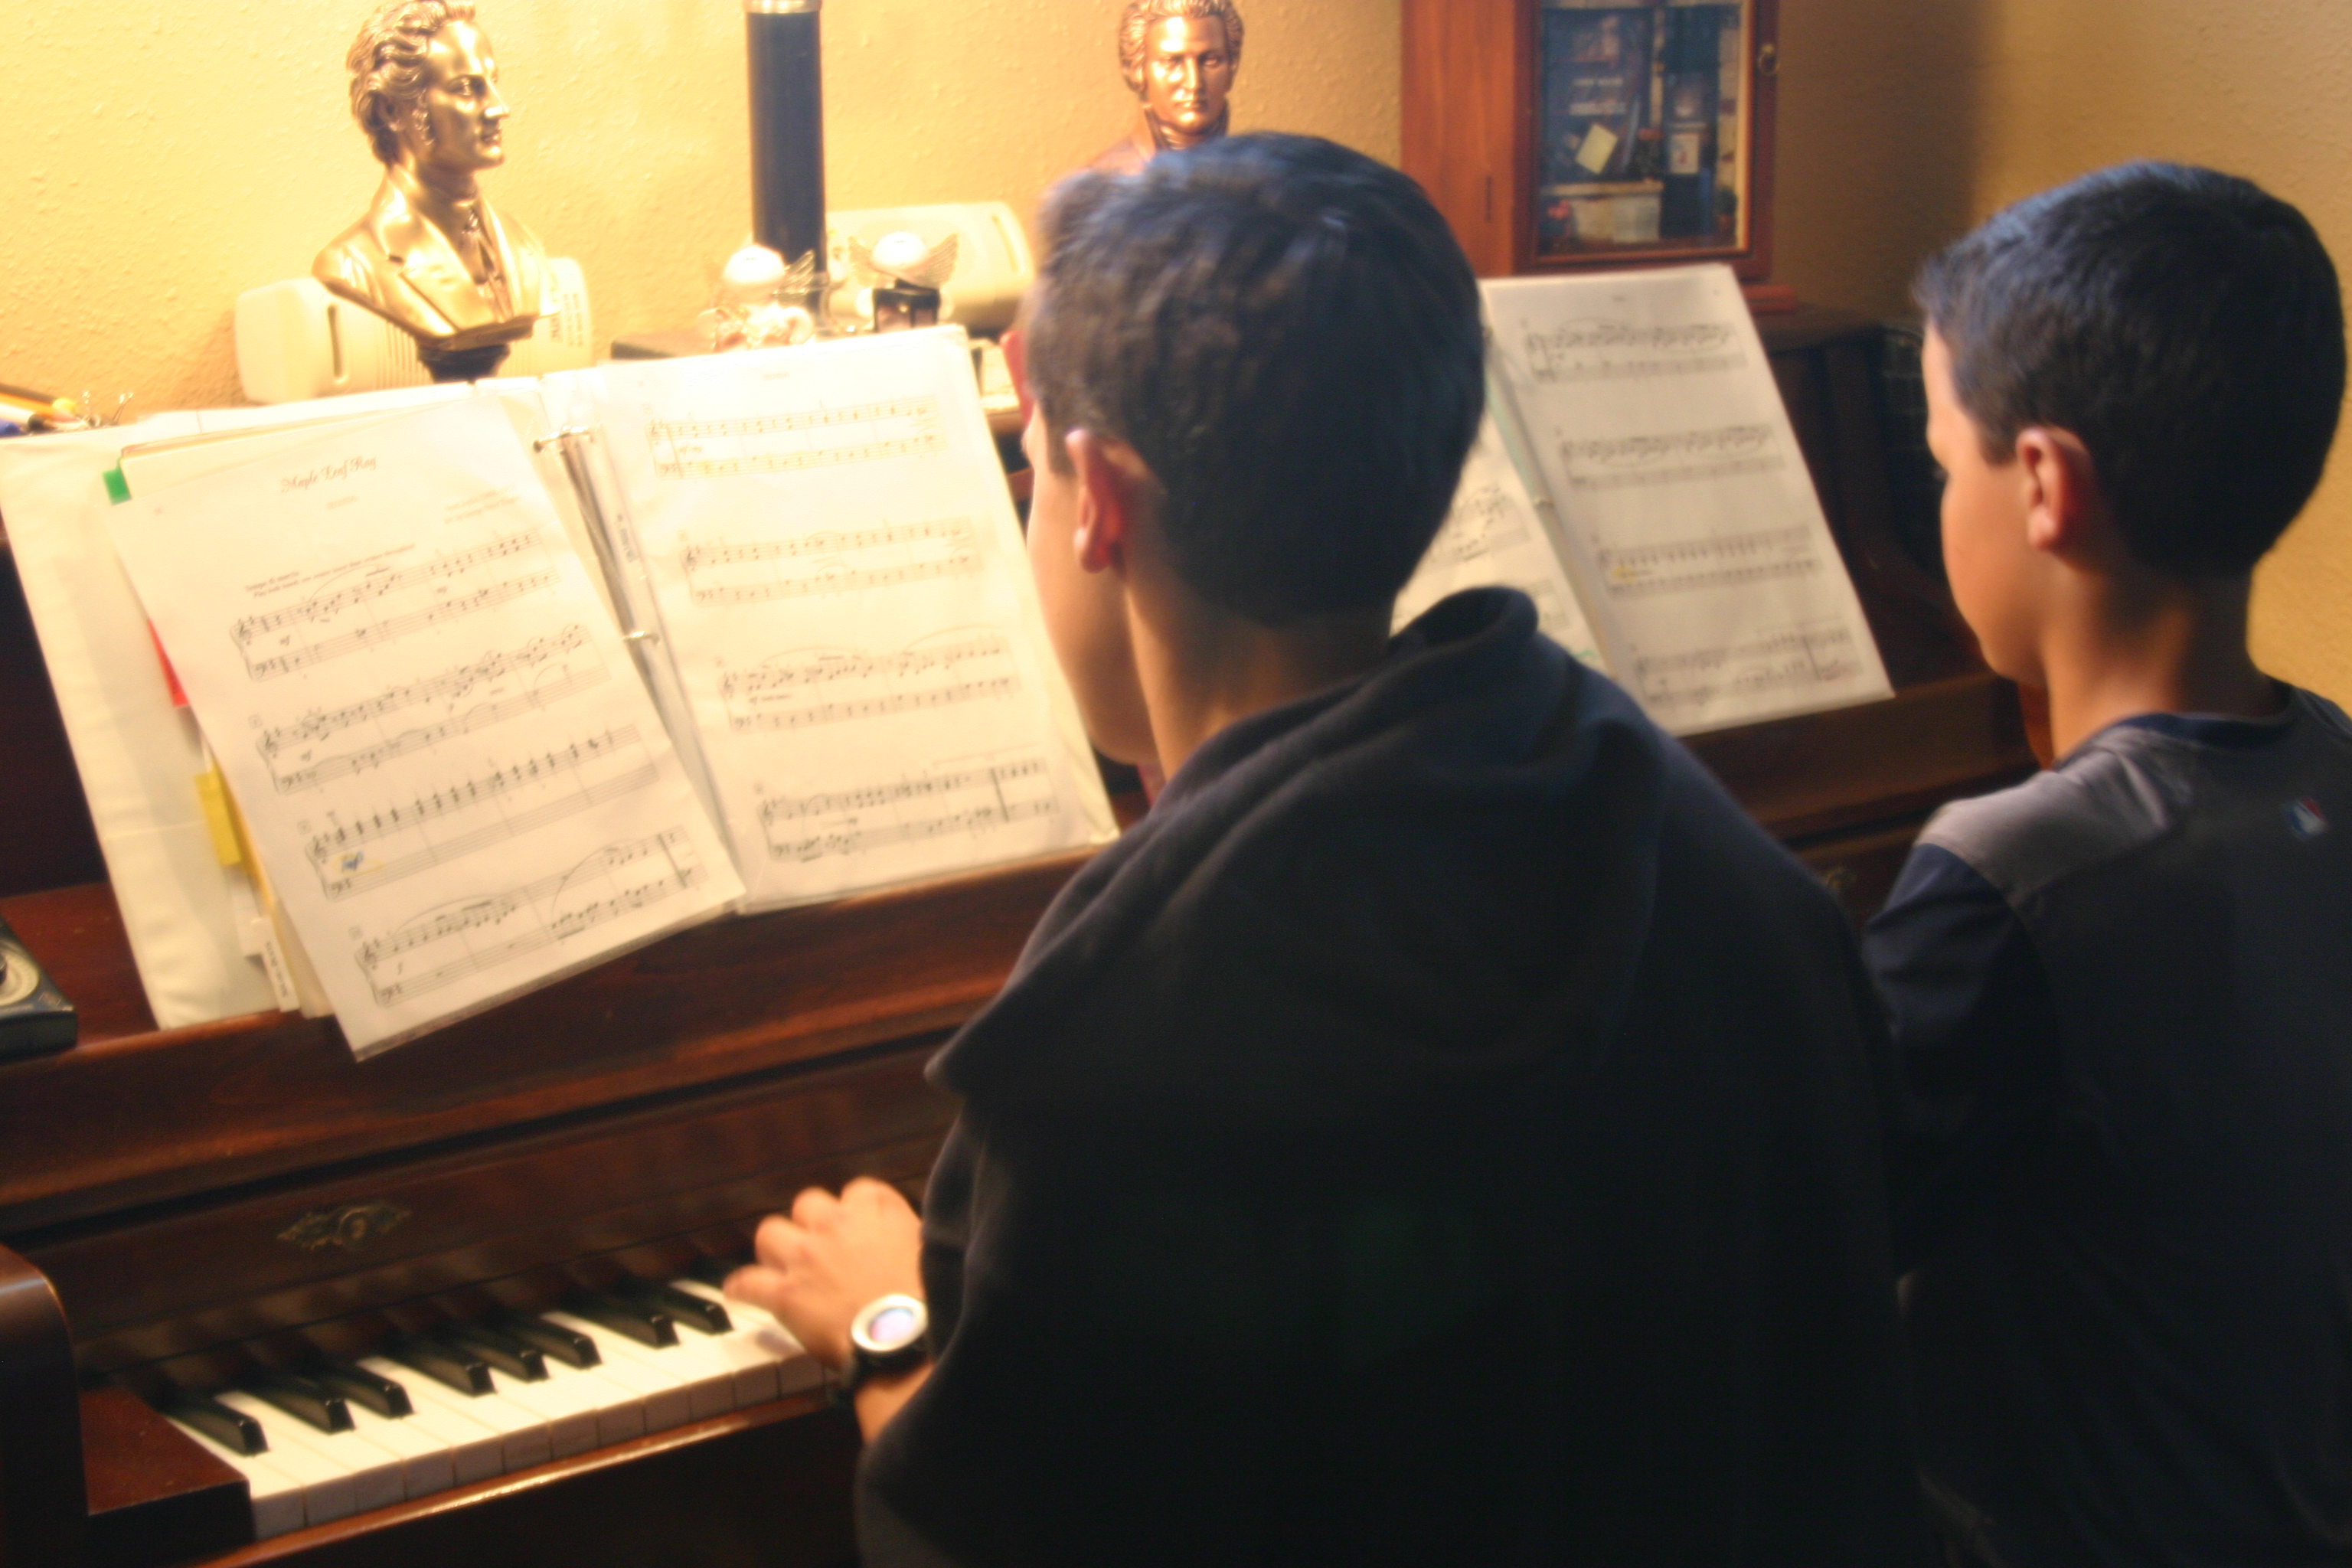 Thomas and Jordan play a duet during lessons